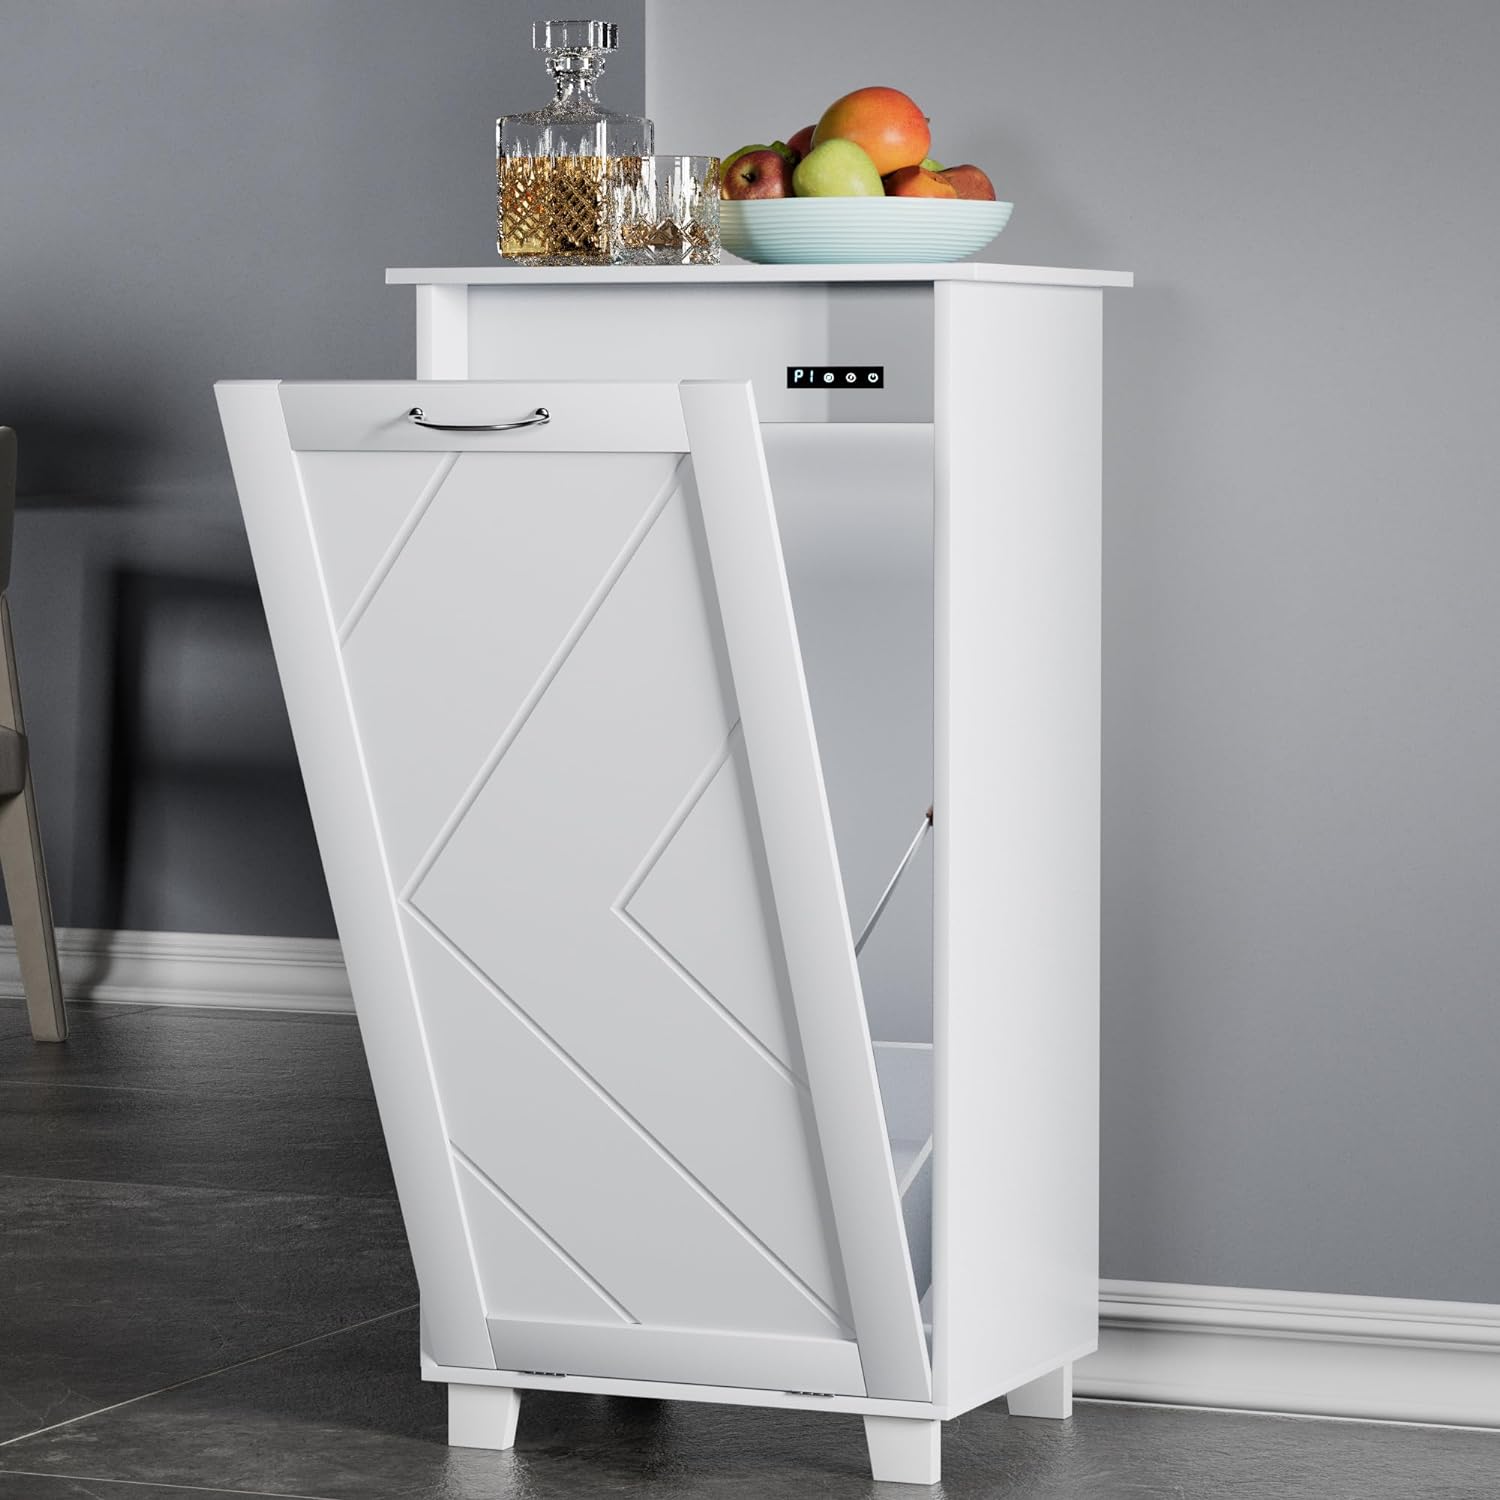 VECELO Tilt Out Kitchen Trash Bin Cabinet, Dog Proof Garbage Can with Wood Holder Free Standing Recycling